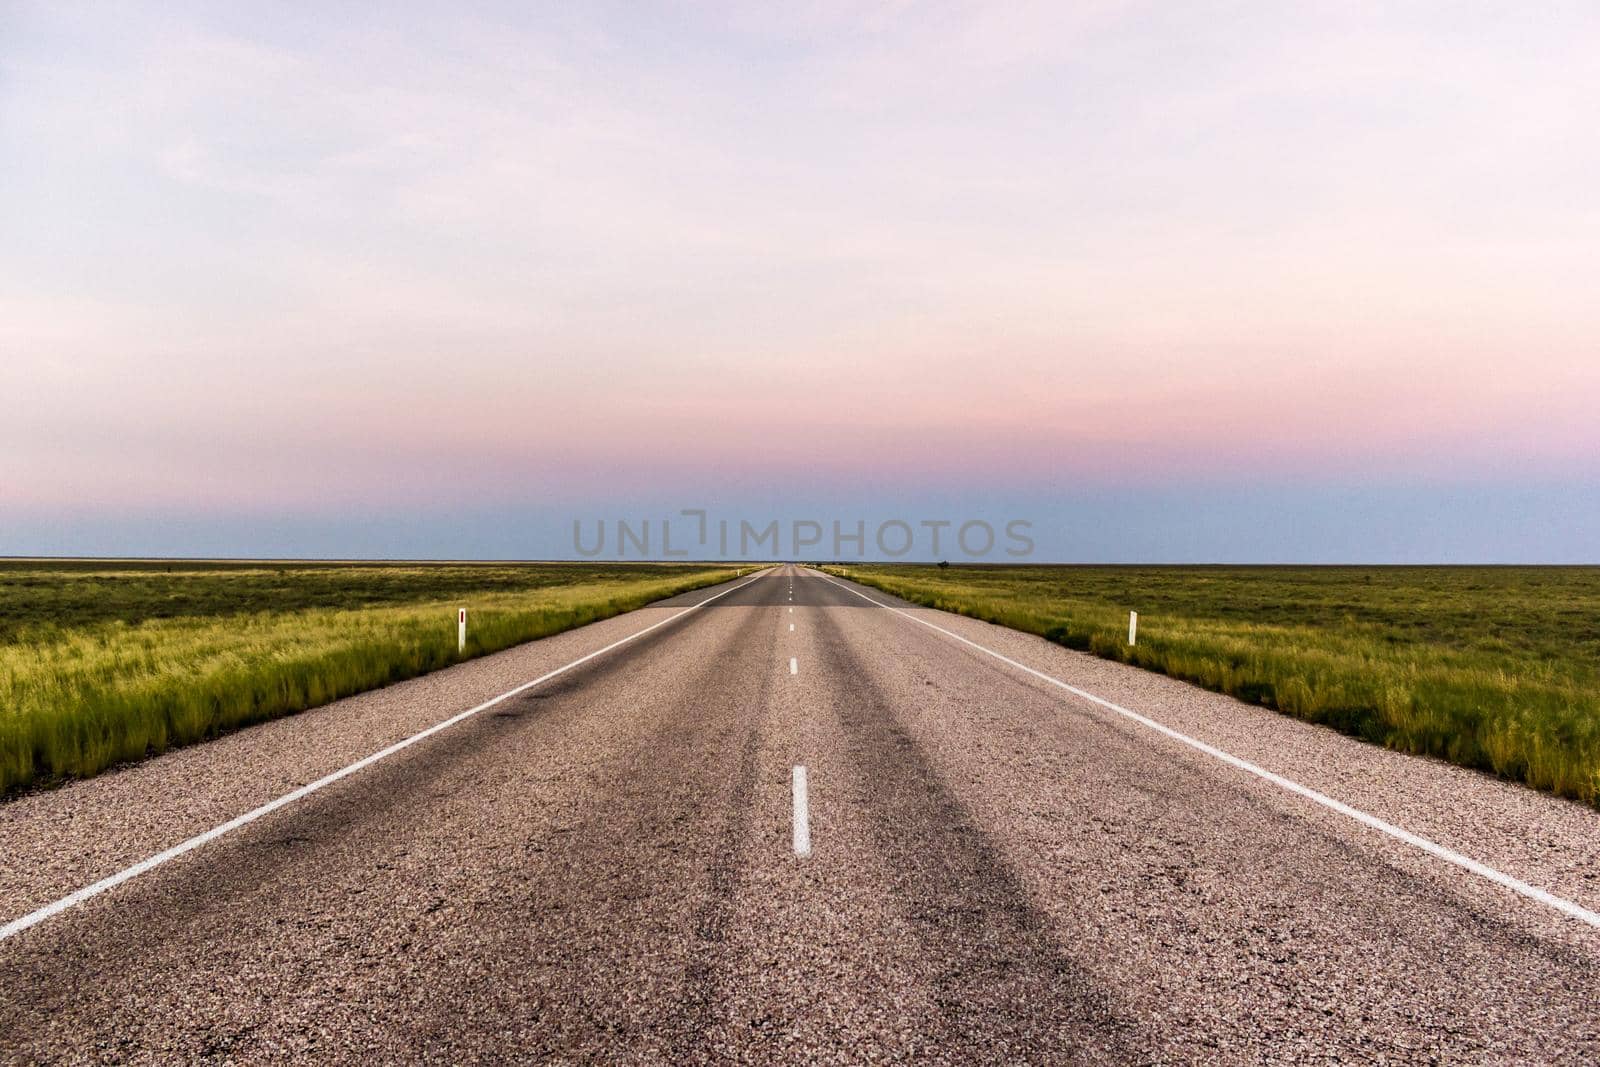 panorama of a straight road through the outback of Australia, after a beautiful sunset